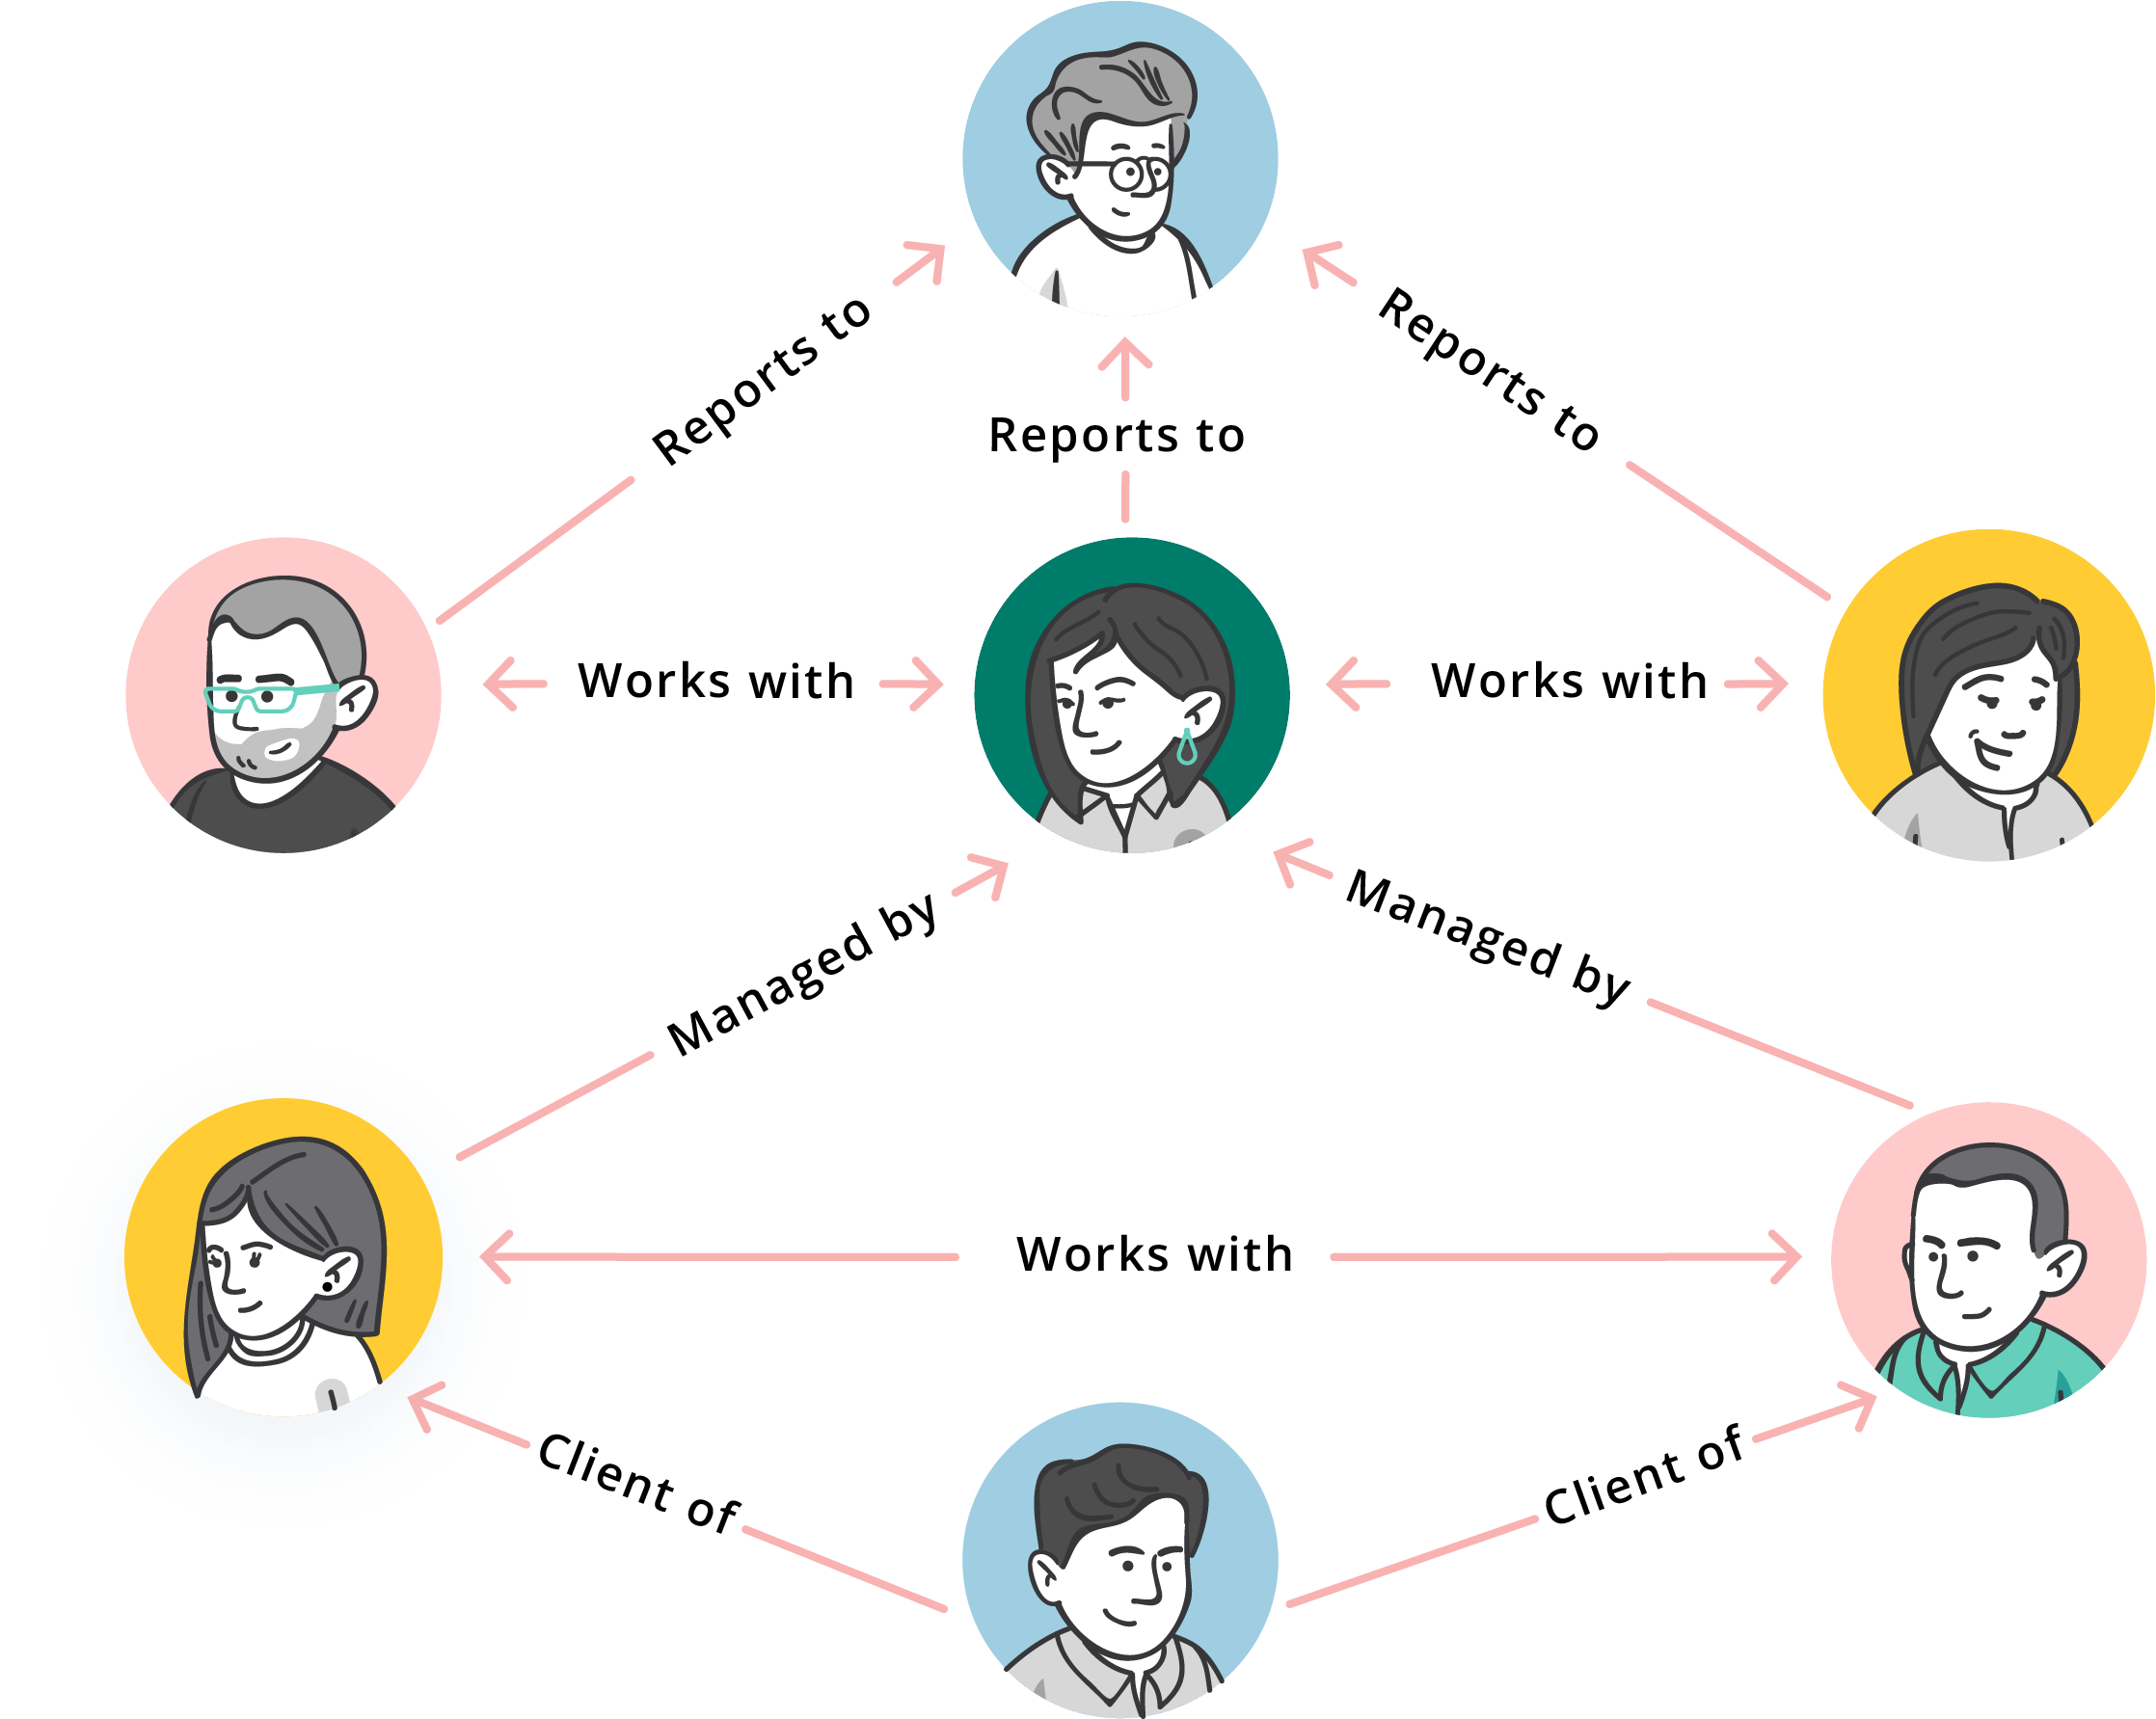 Network of relationships